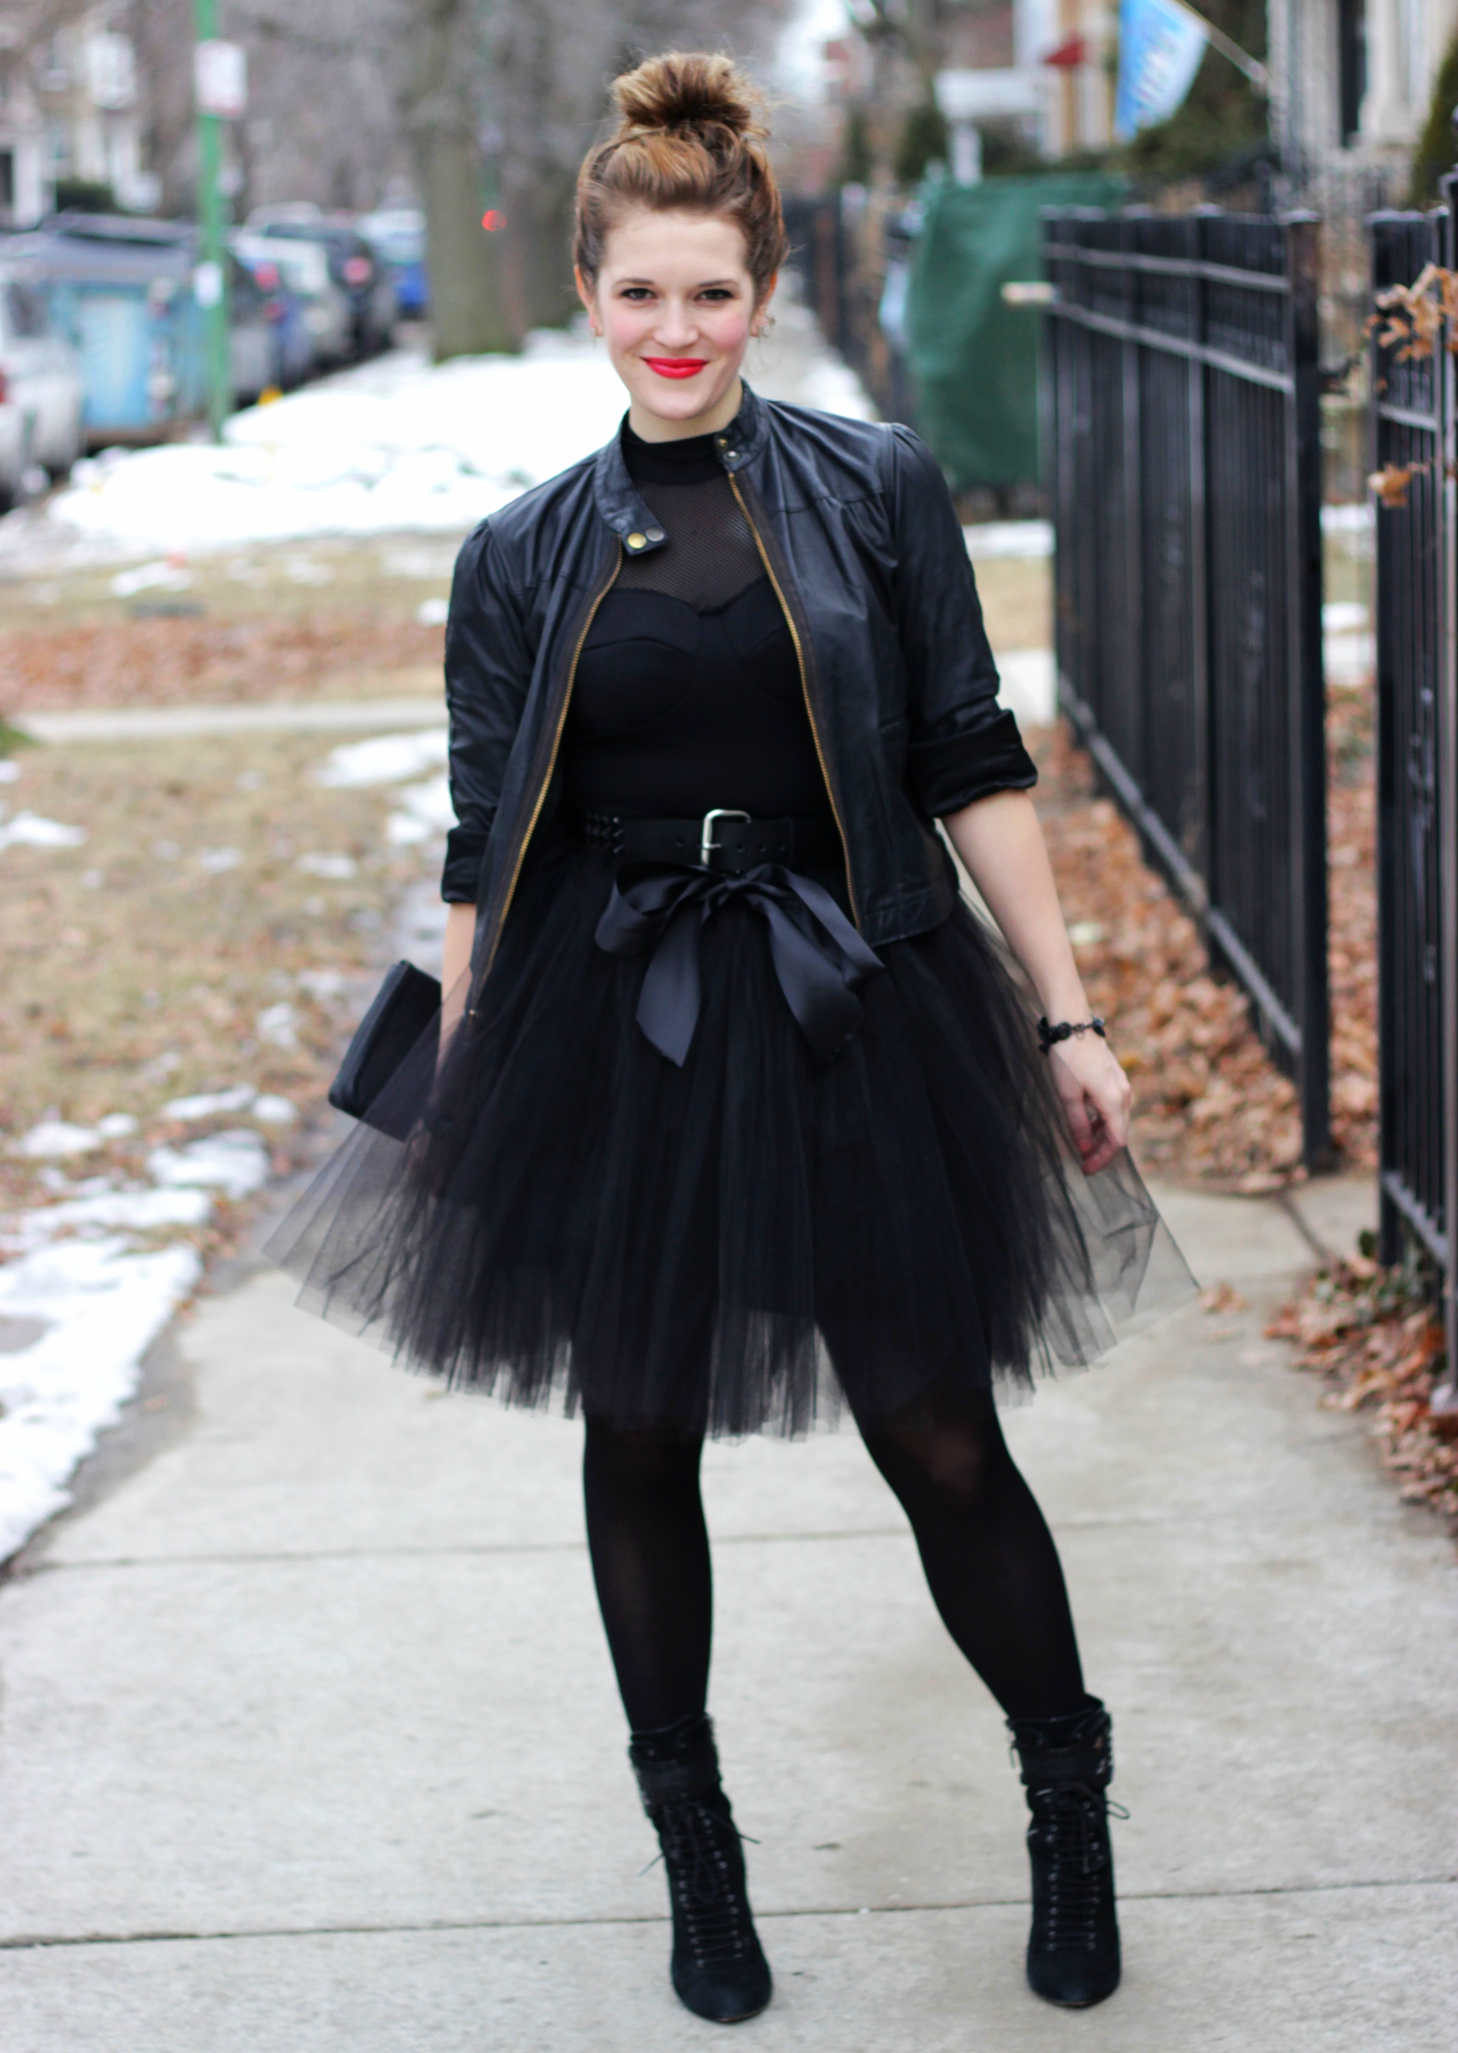 PUNK BALLERINA – WHO SAYS YOU CAN’T WEAR A TUTU AFTER 30?!